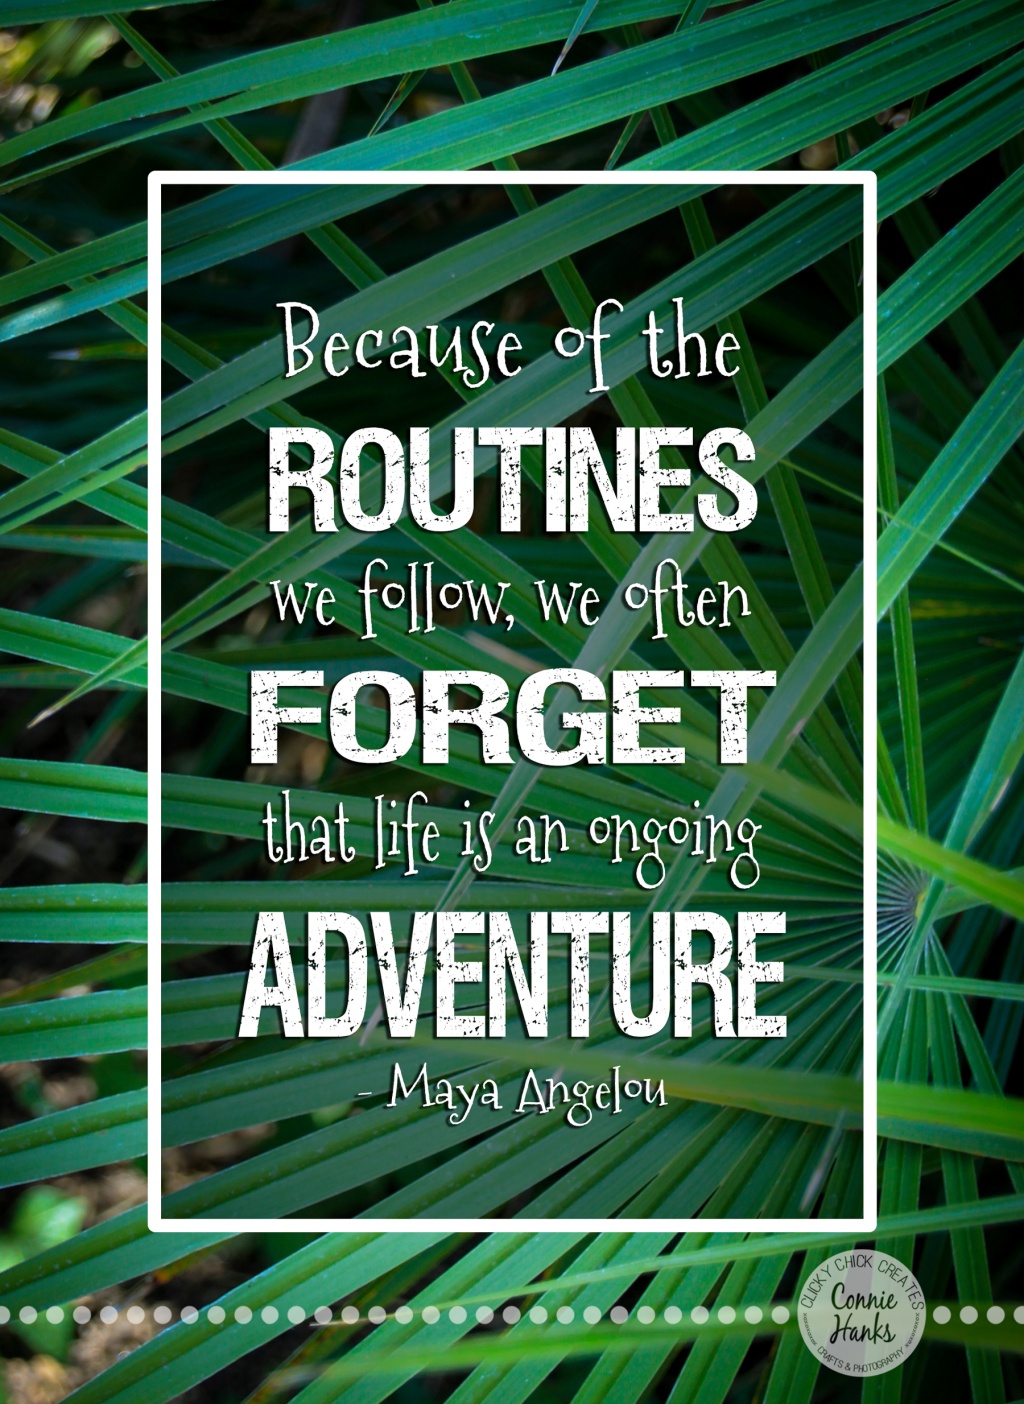 Connie Hanks Photography // ClickyChickCreates.com // "Because of the routines we follow, we often forget that life is an ongoing adventure" Maya Angelou quote